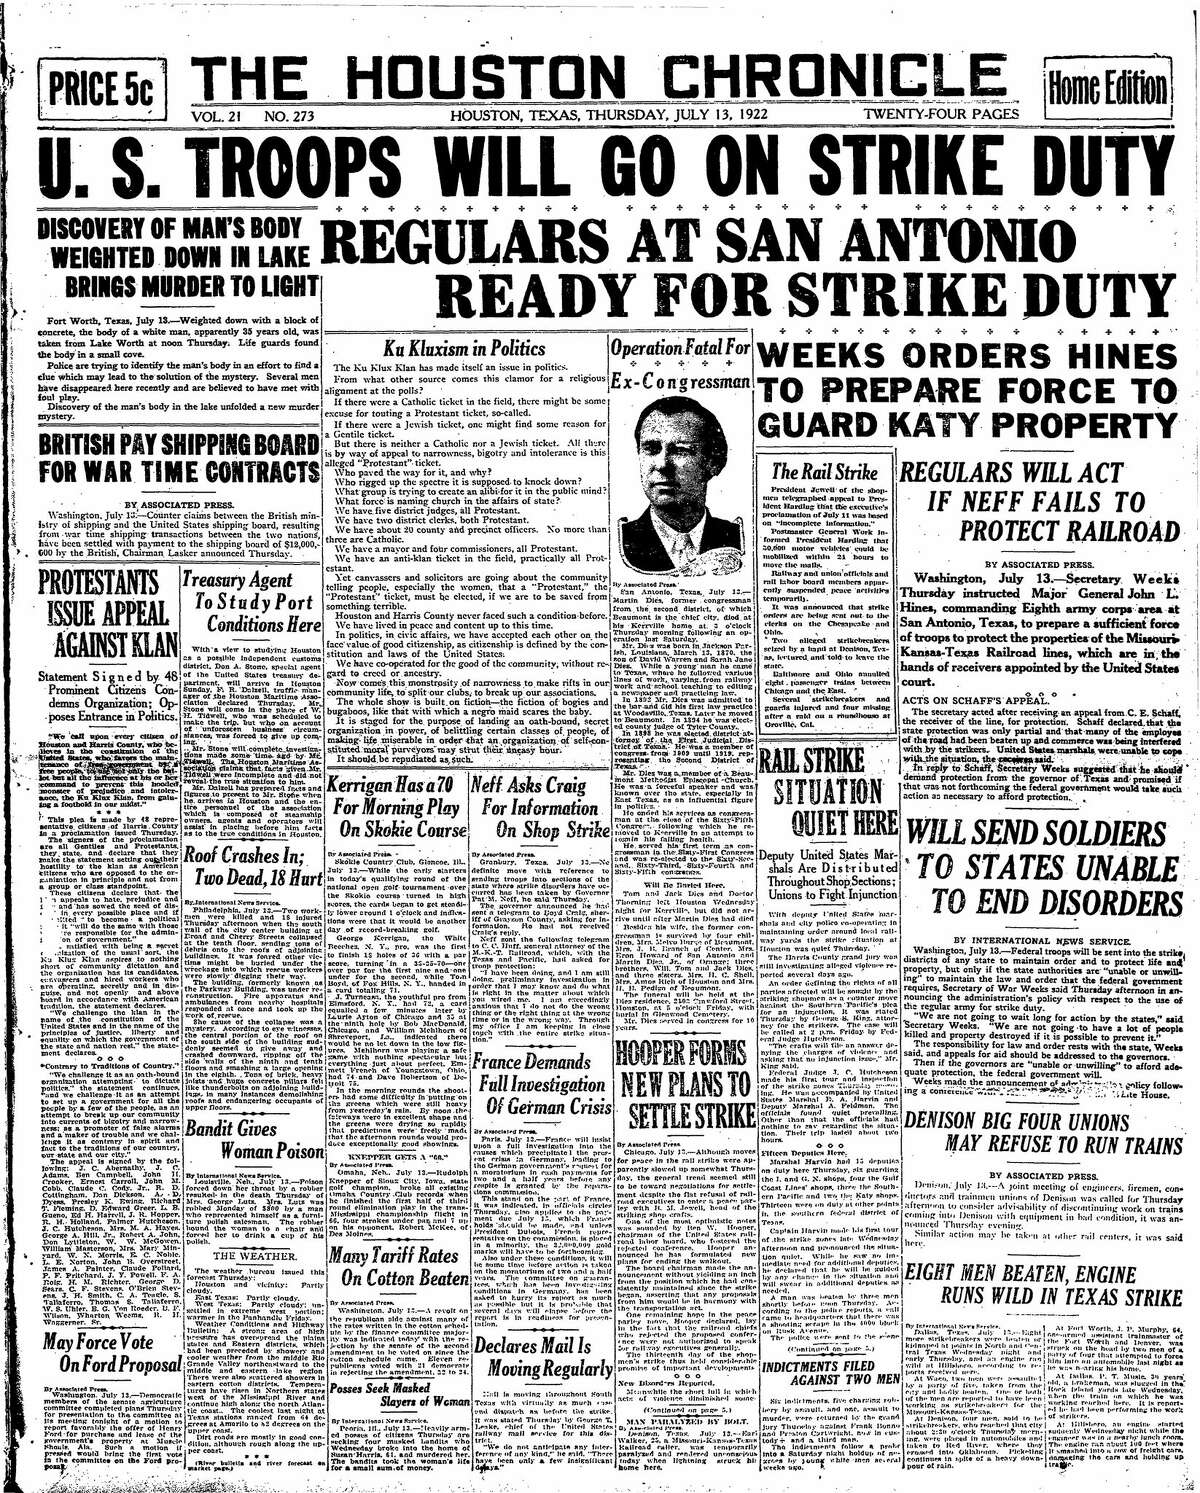 Houston Chronicle front page for July 13, 1922.